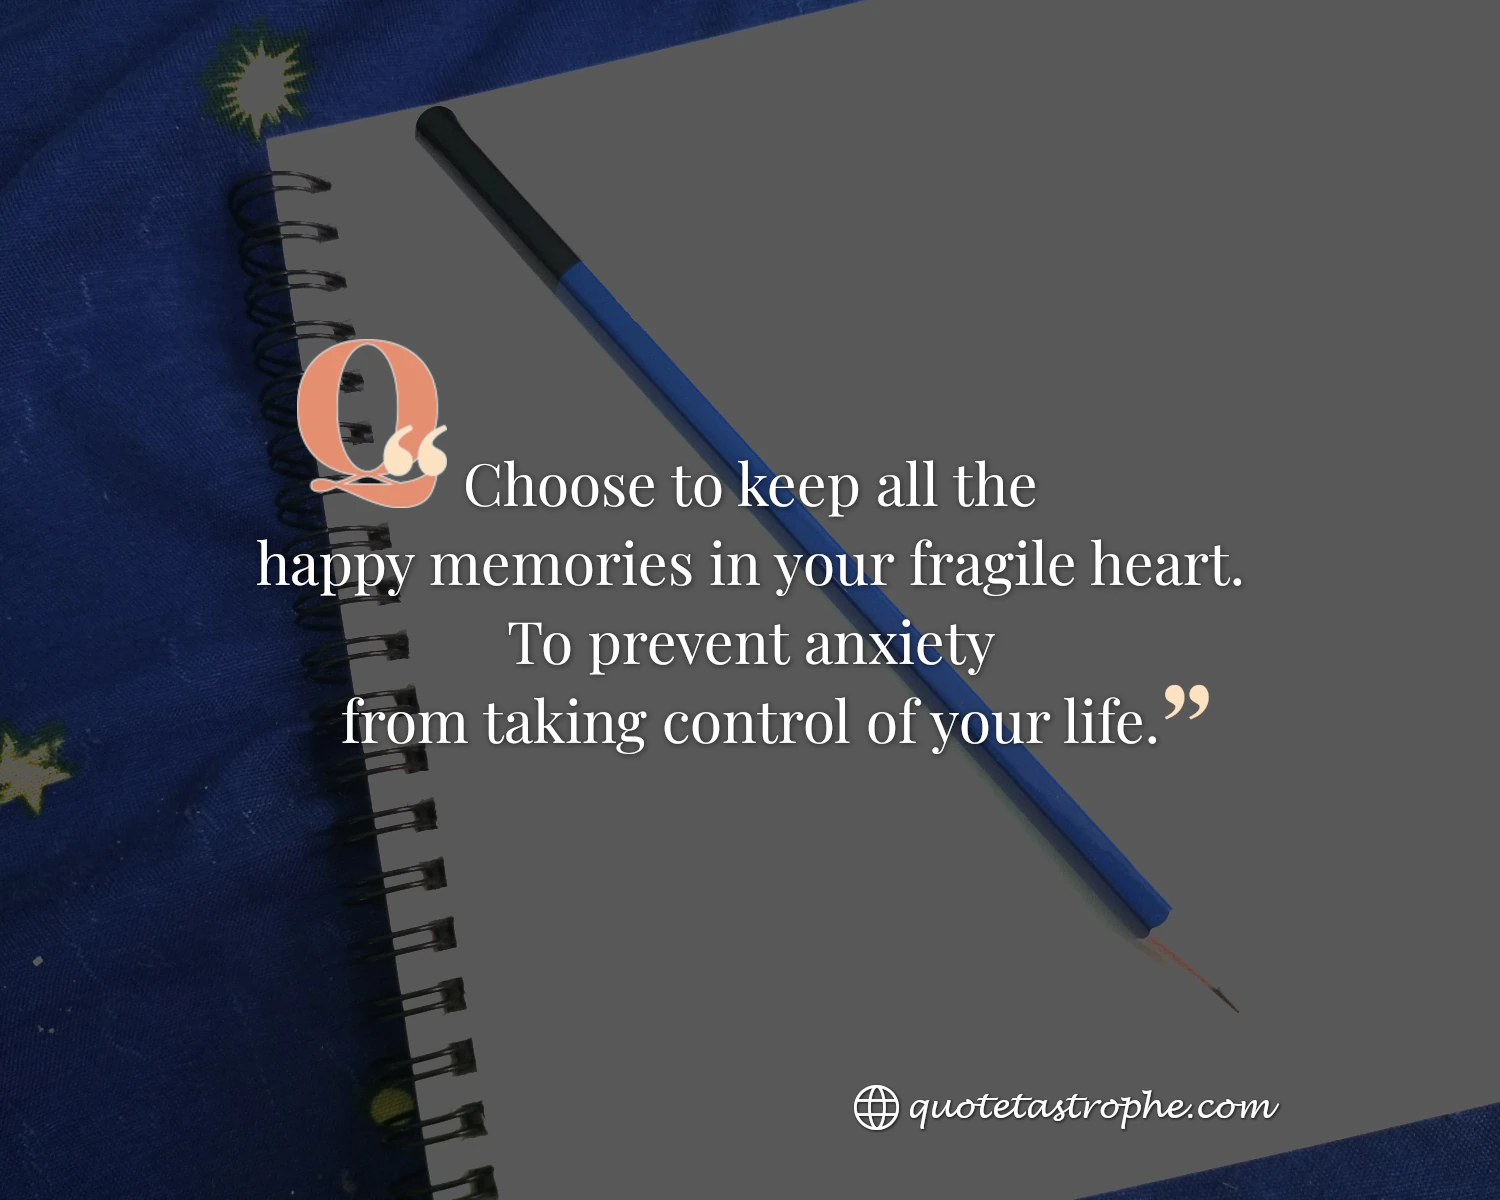 Choose to Keep All The Happy Memories in Your Fragile Heart